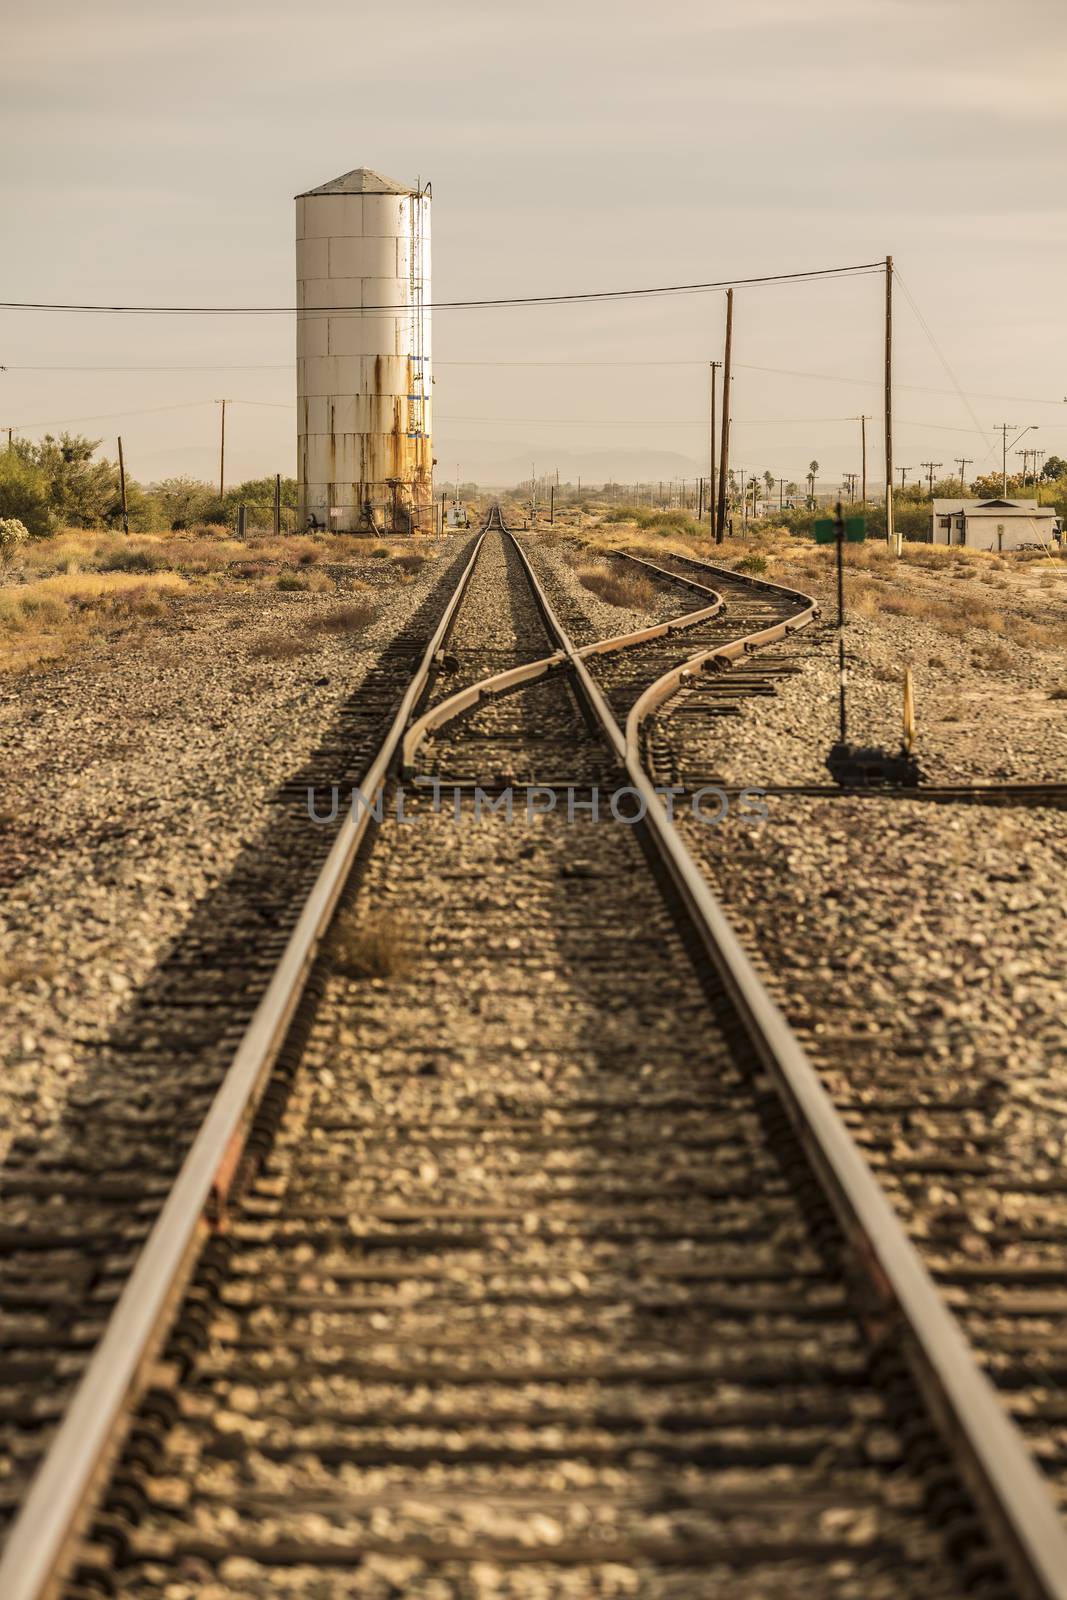 Railroad tracks and siding in the historic American west